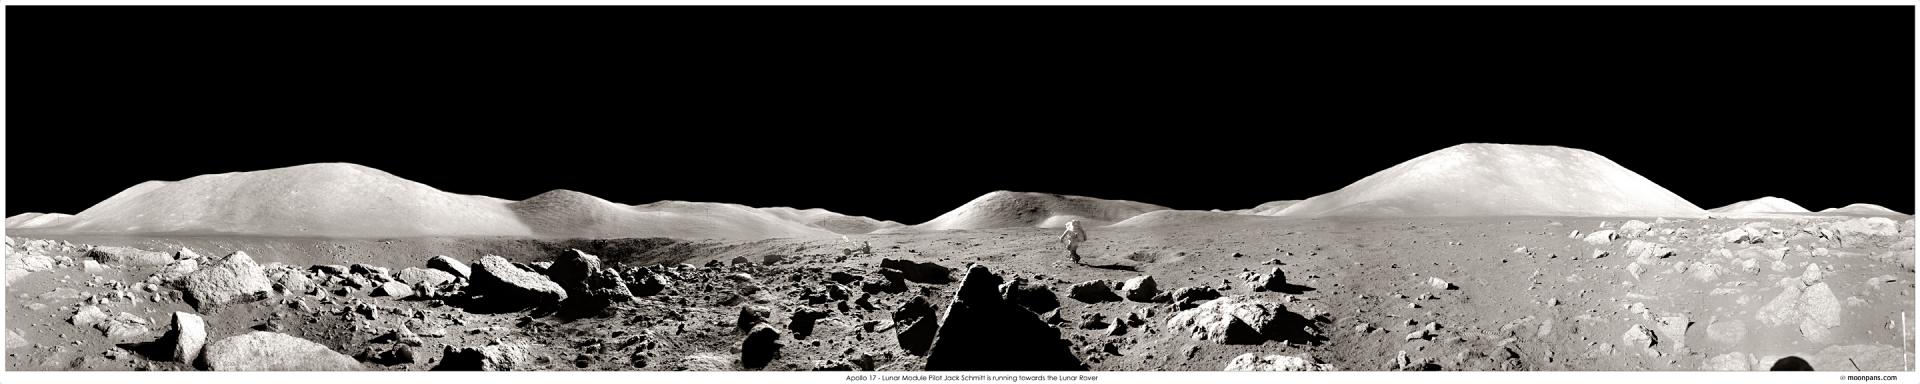 Panorama of the moon surface.
Done by Apollo 17.